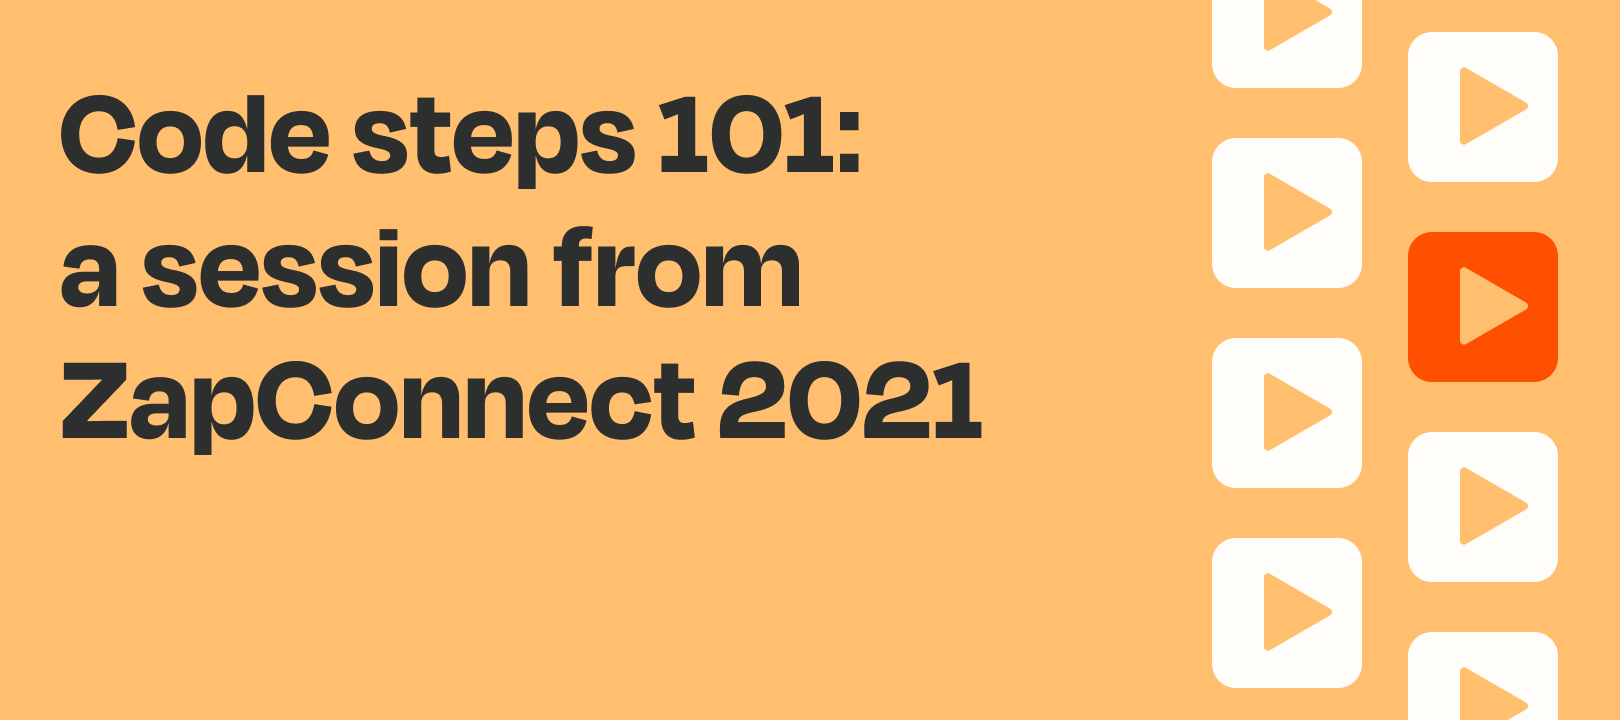 Code steps 101 (session from ZapConnect 2021)